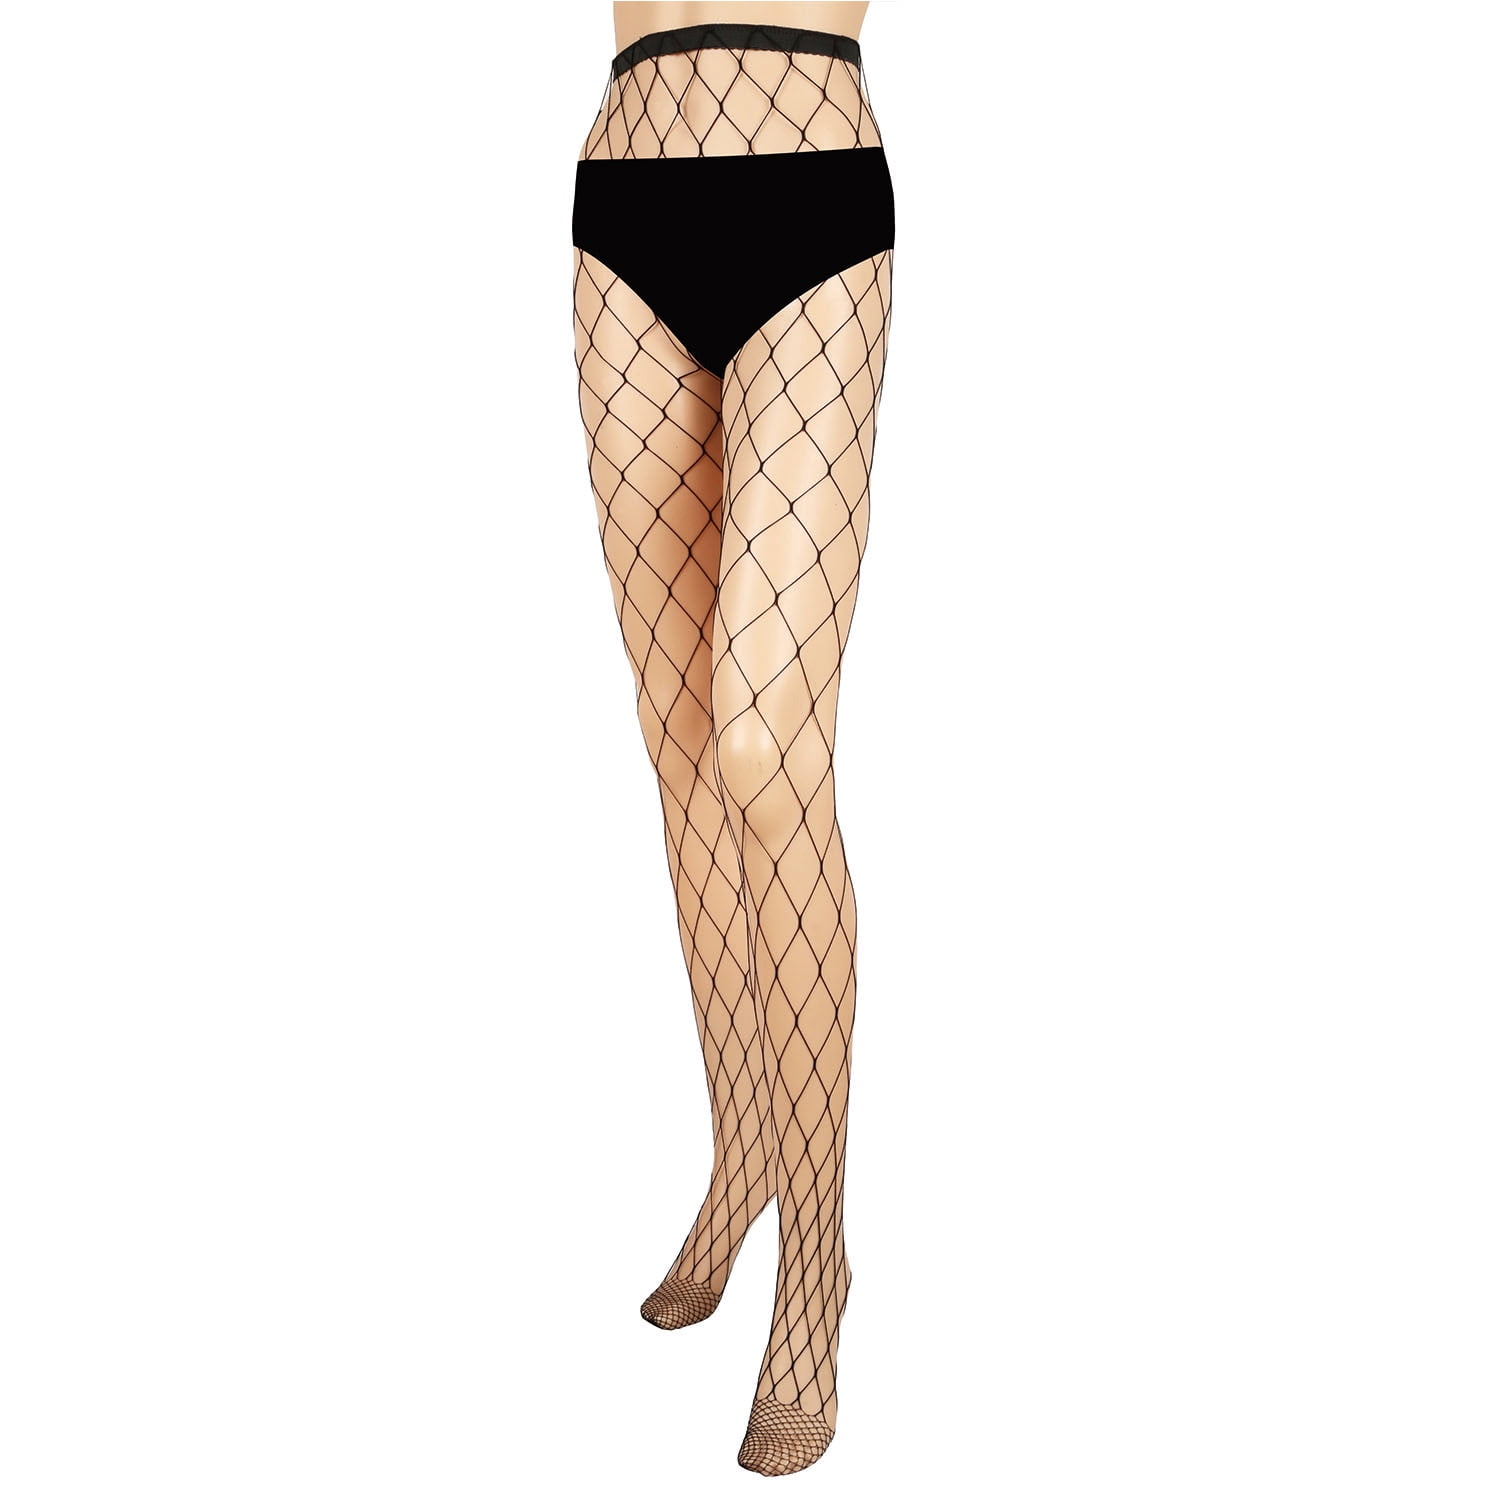 3 Pack Black Fishnet Tights, Hollow Out High Waist Mesh Pantyhose, Women's  Stockings & Hosiery